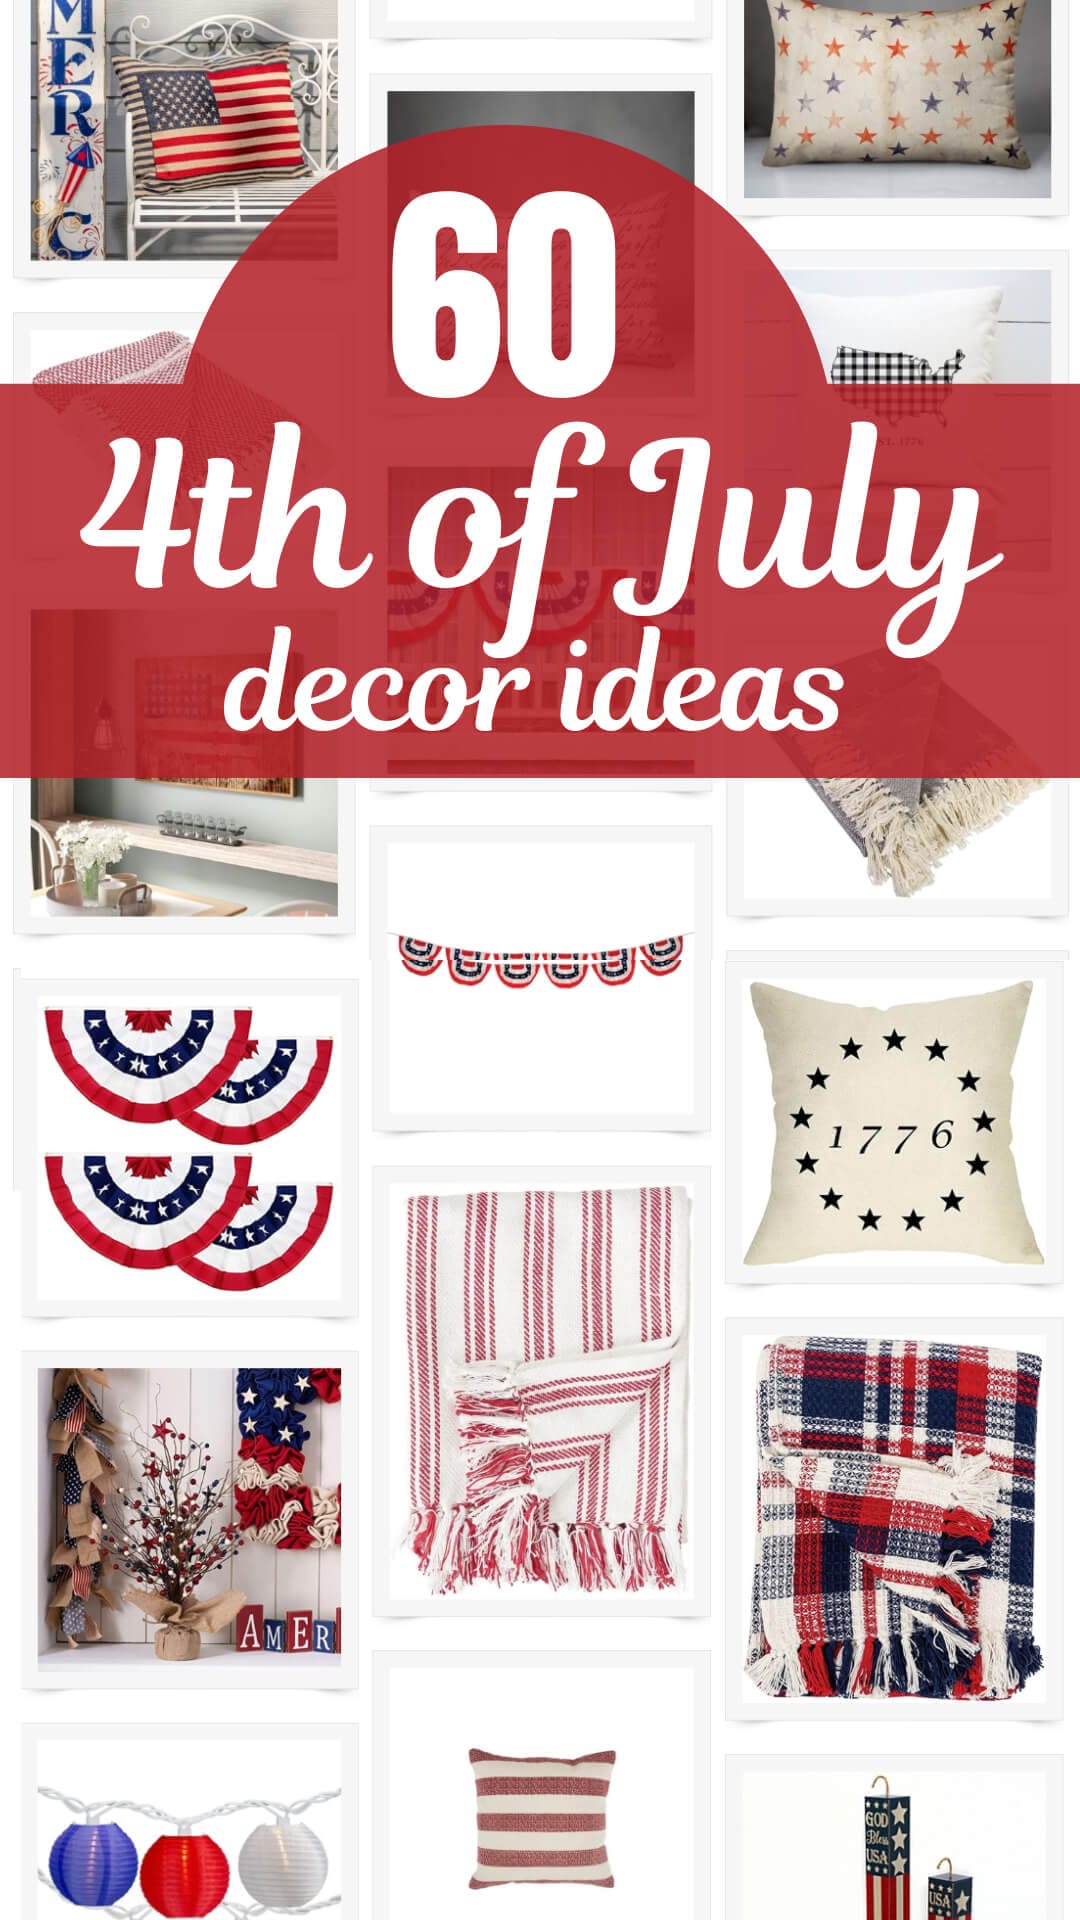 4th Of July Decorations to Add to Your Home!